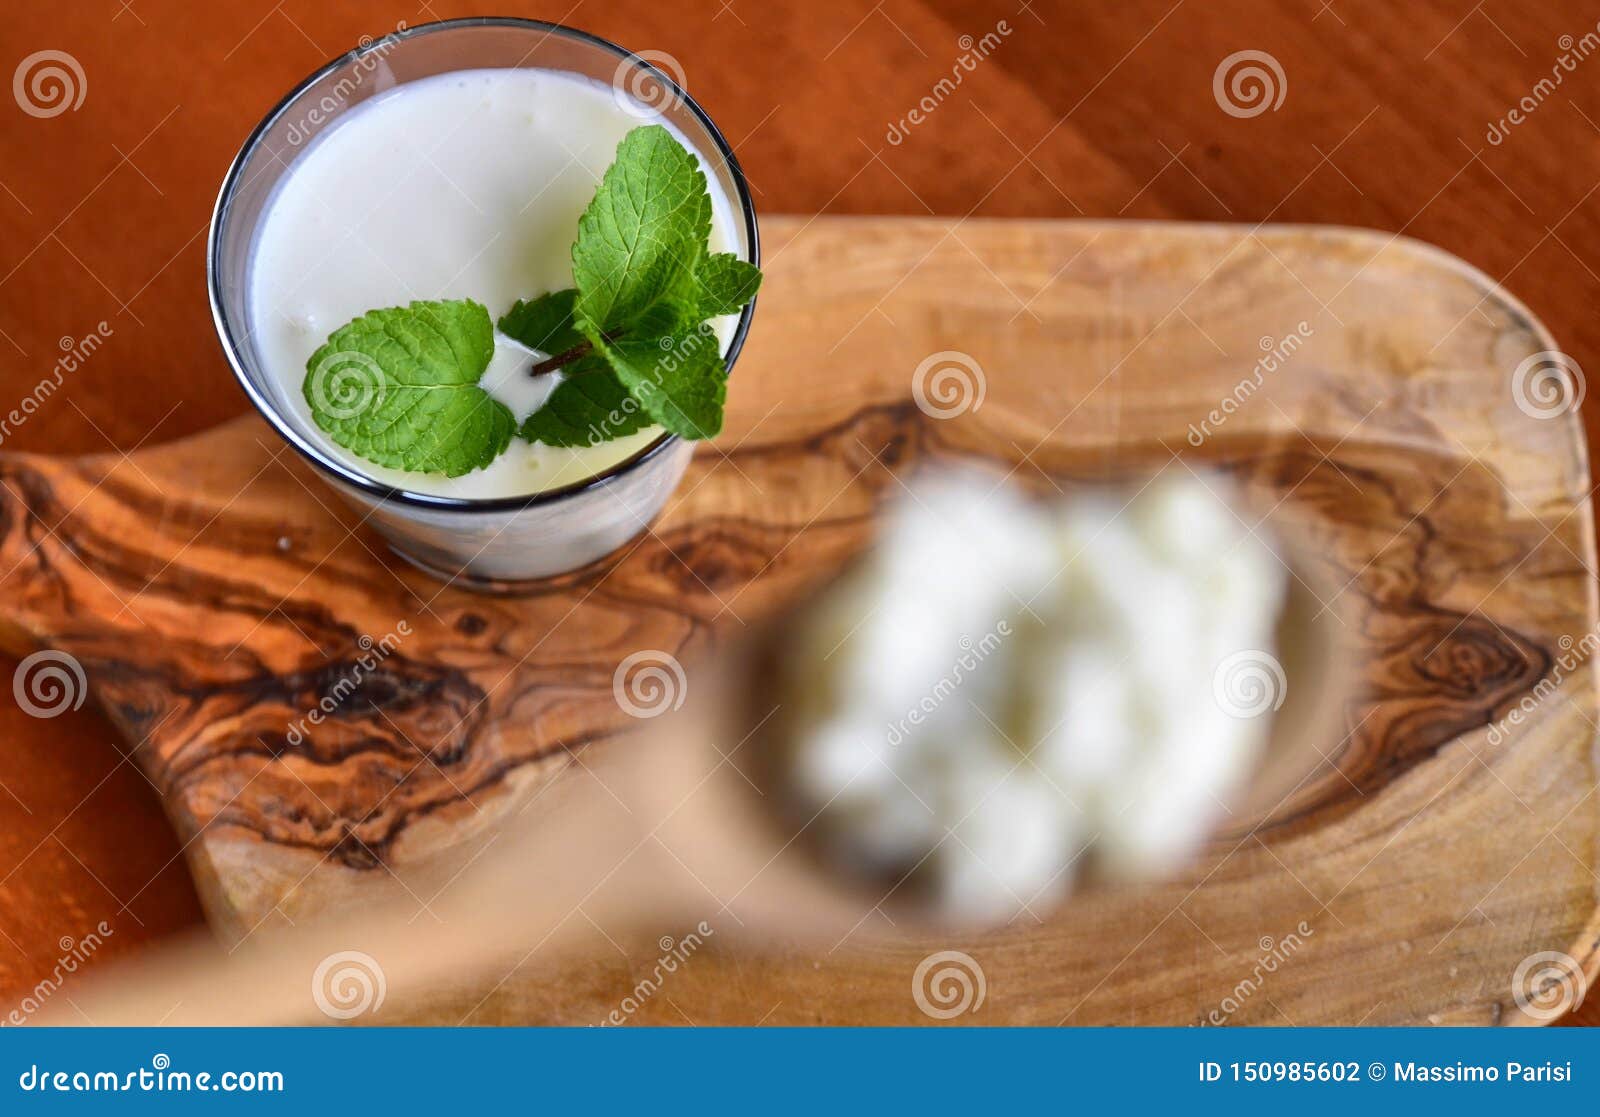 kefir enriched with some mint leaves